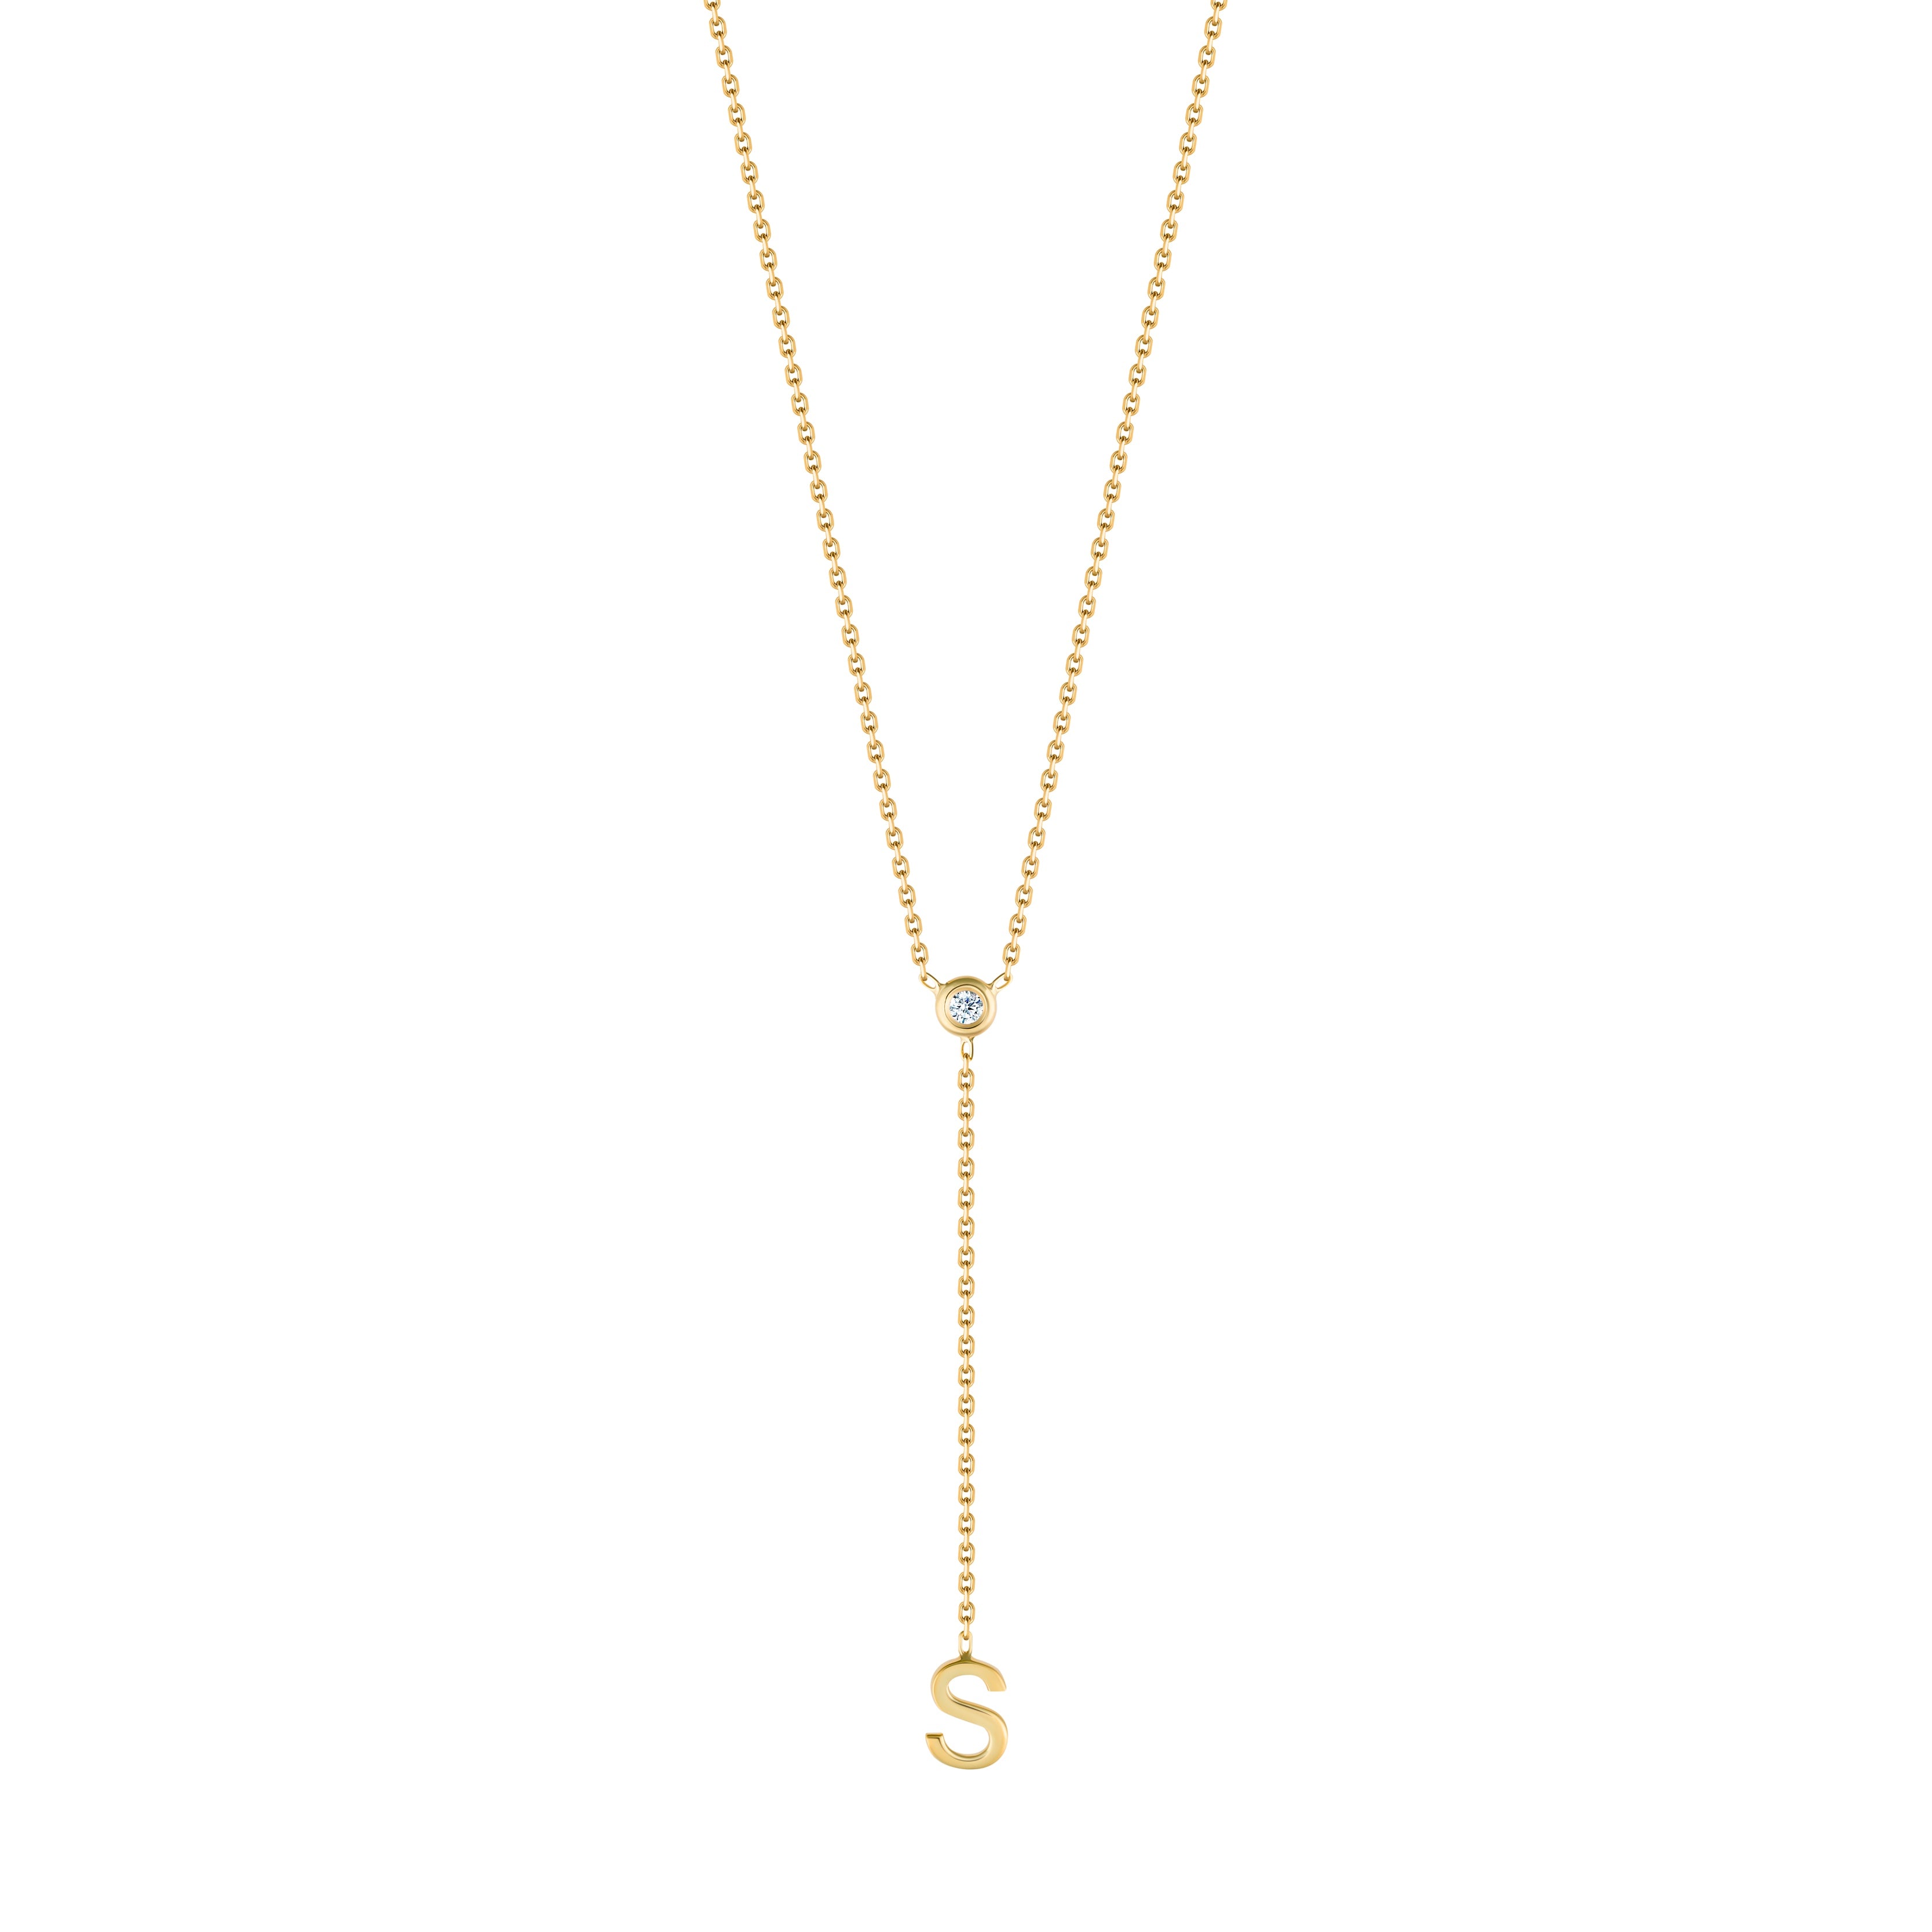 Stone and Letter Lariat Necklace